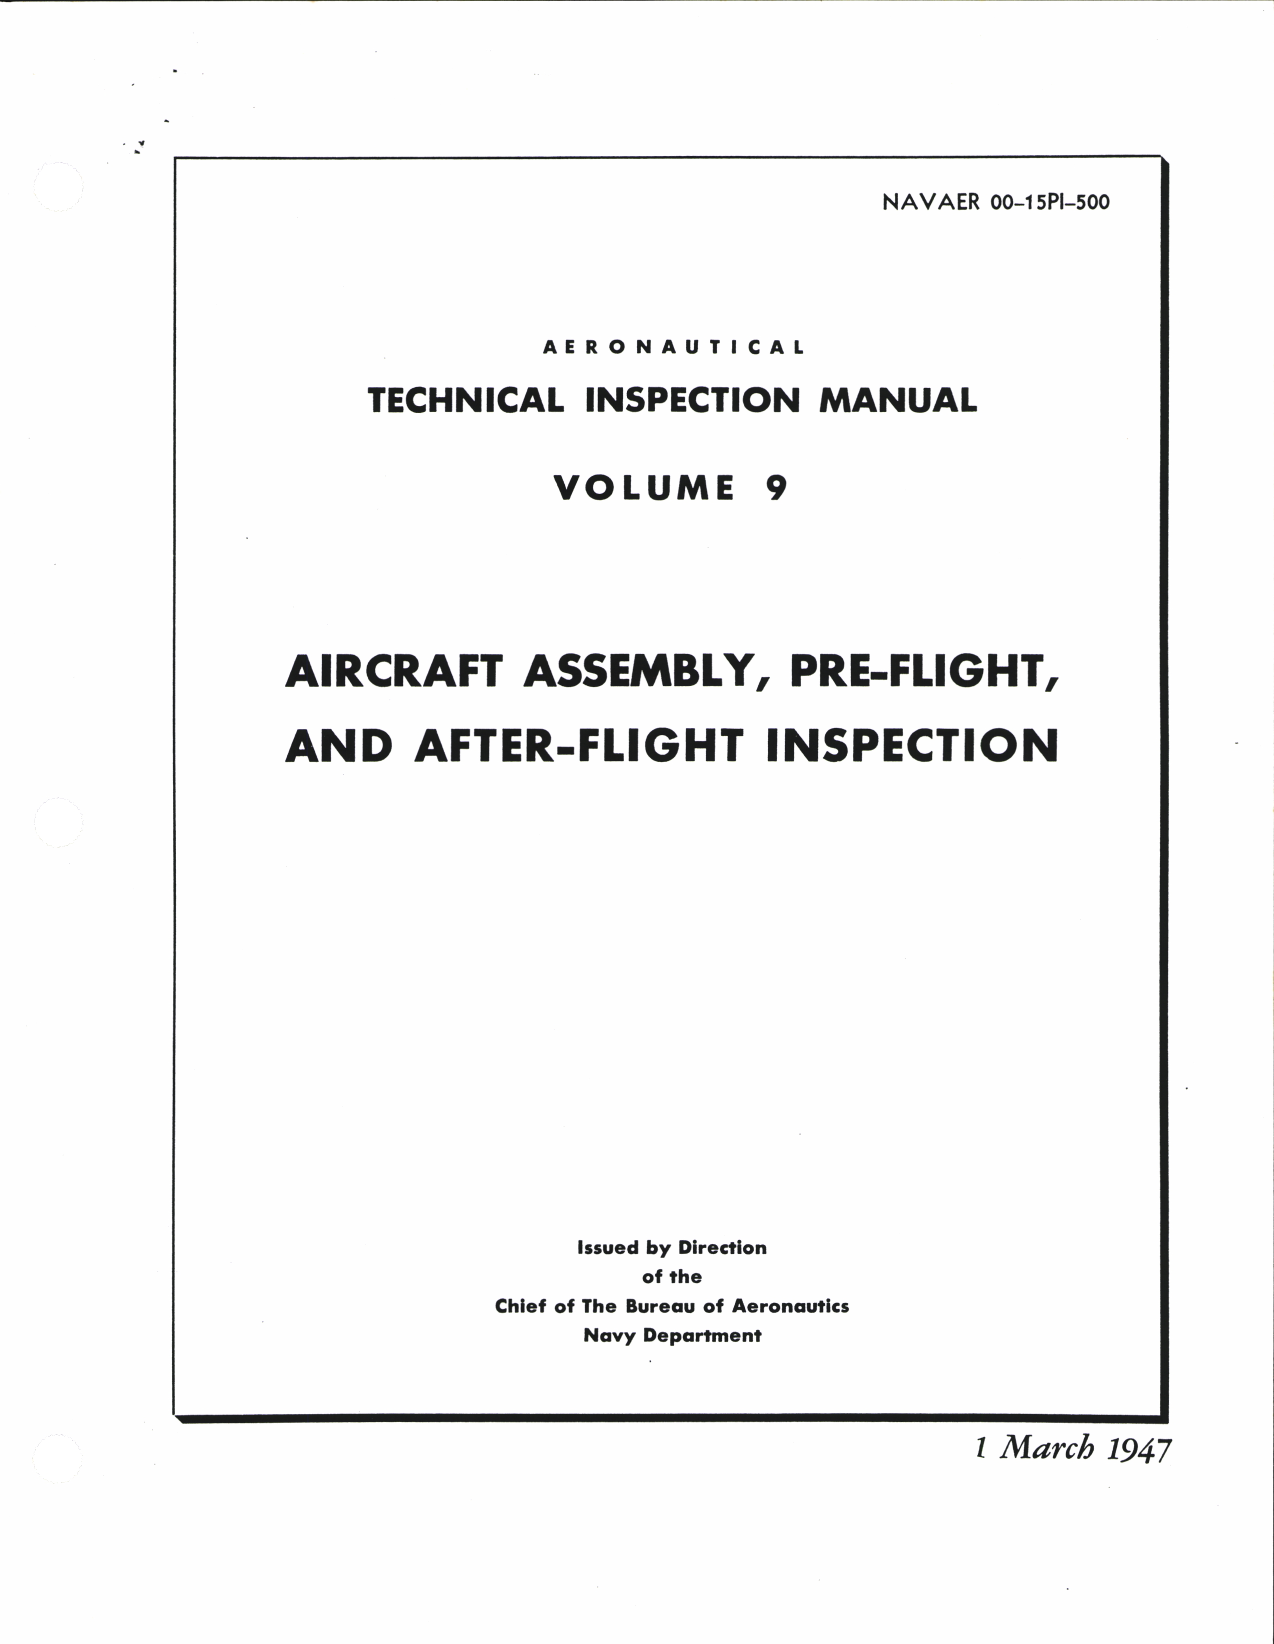 Sample page 1 from AirCorps Library document: Aeronautical Inspection Manual volume 9 for Aircraft Assembly, Pre-Flight and After-Flight Inspection